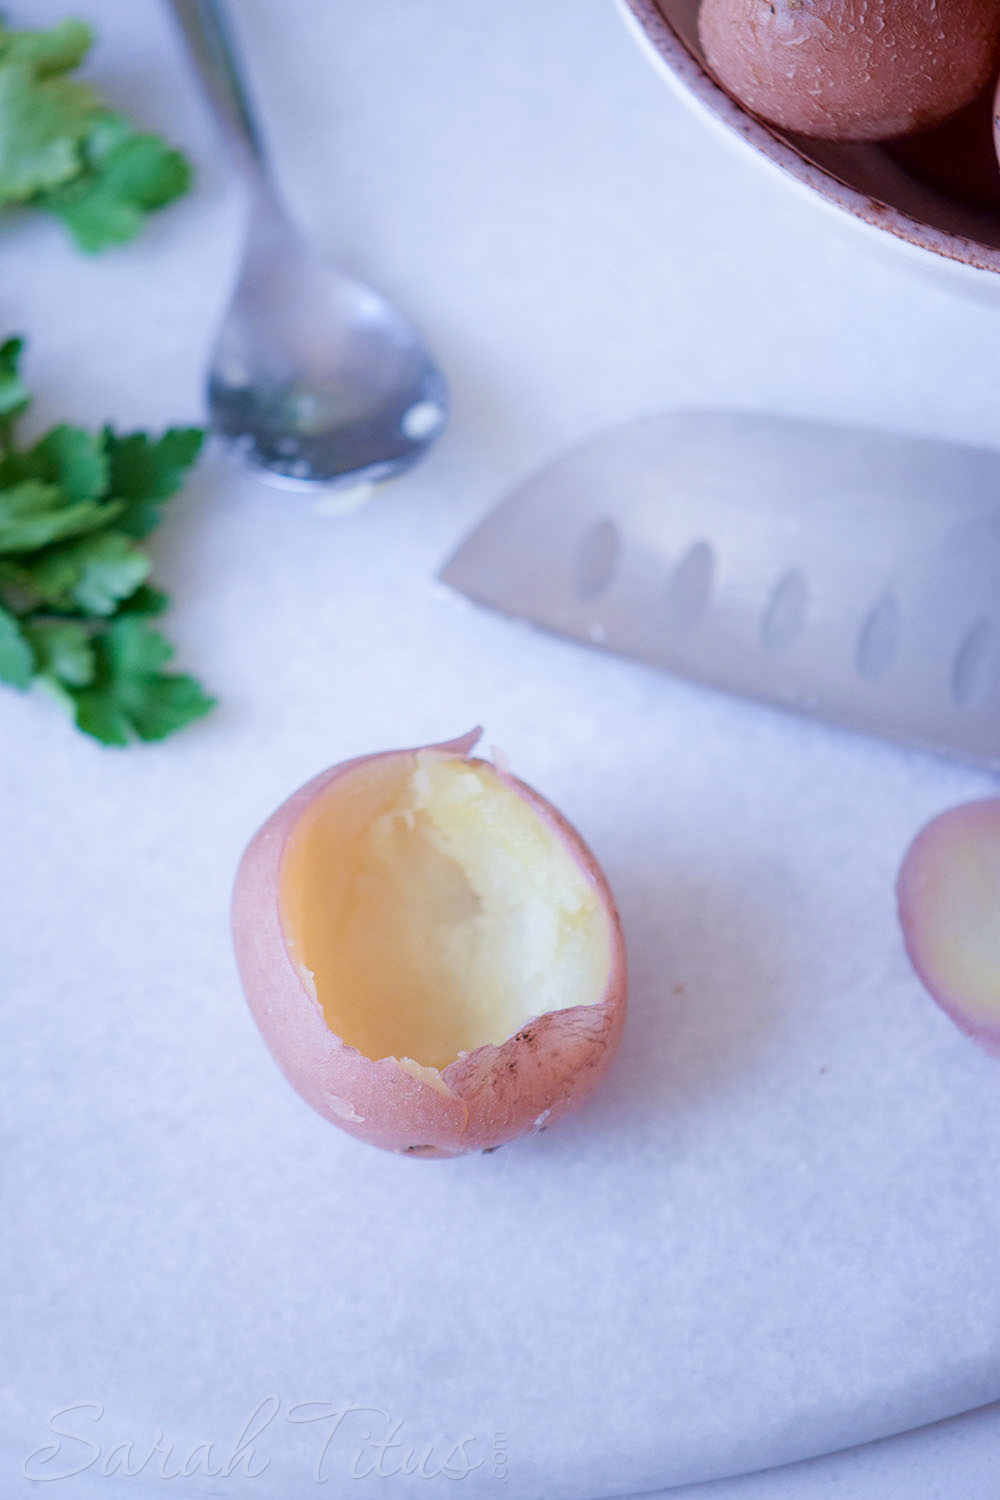 Red potato is now a little "bowl" for your cream cheese mixture